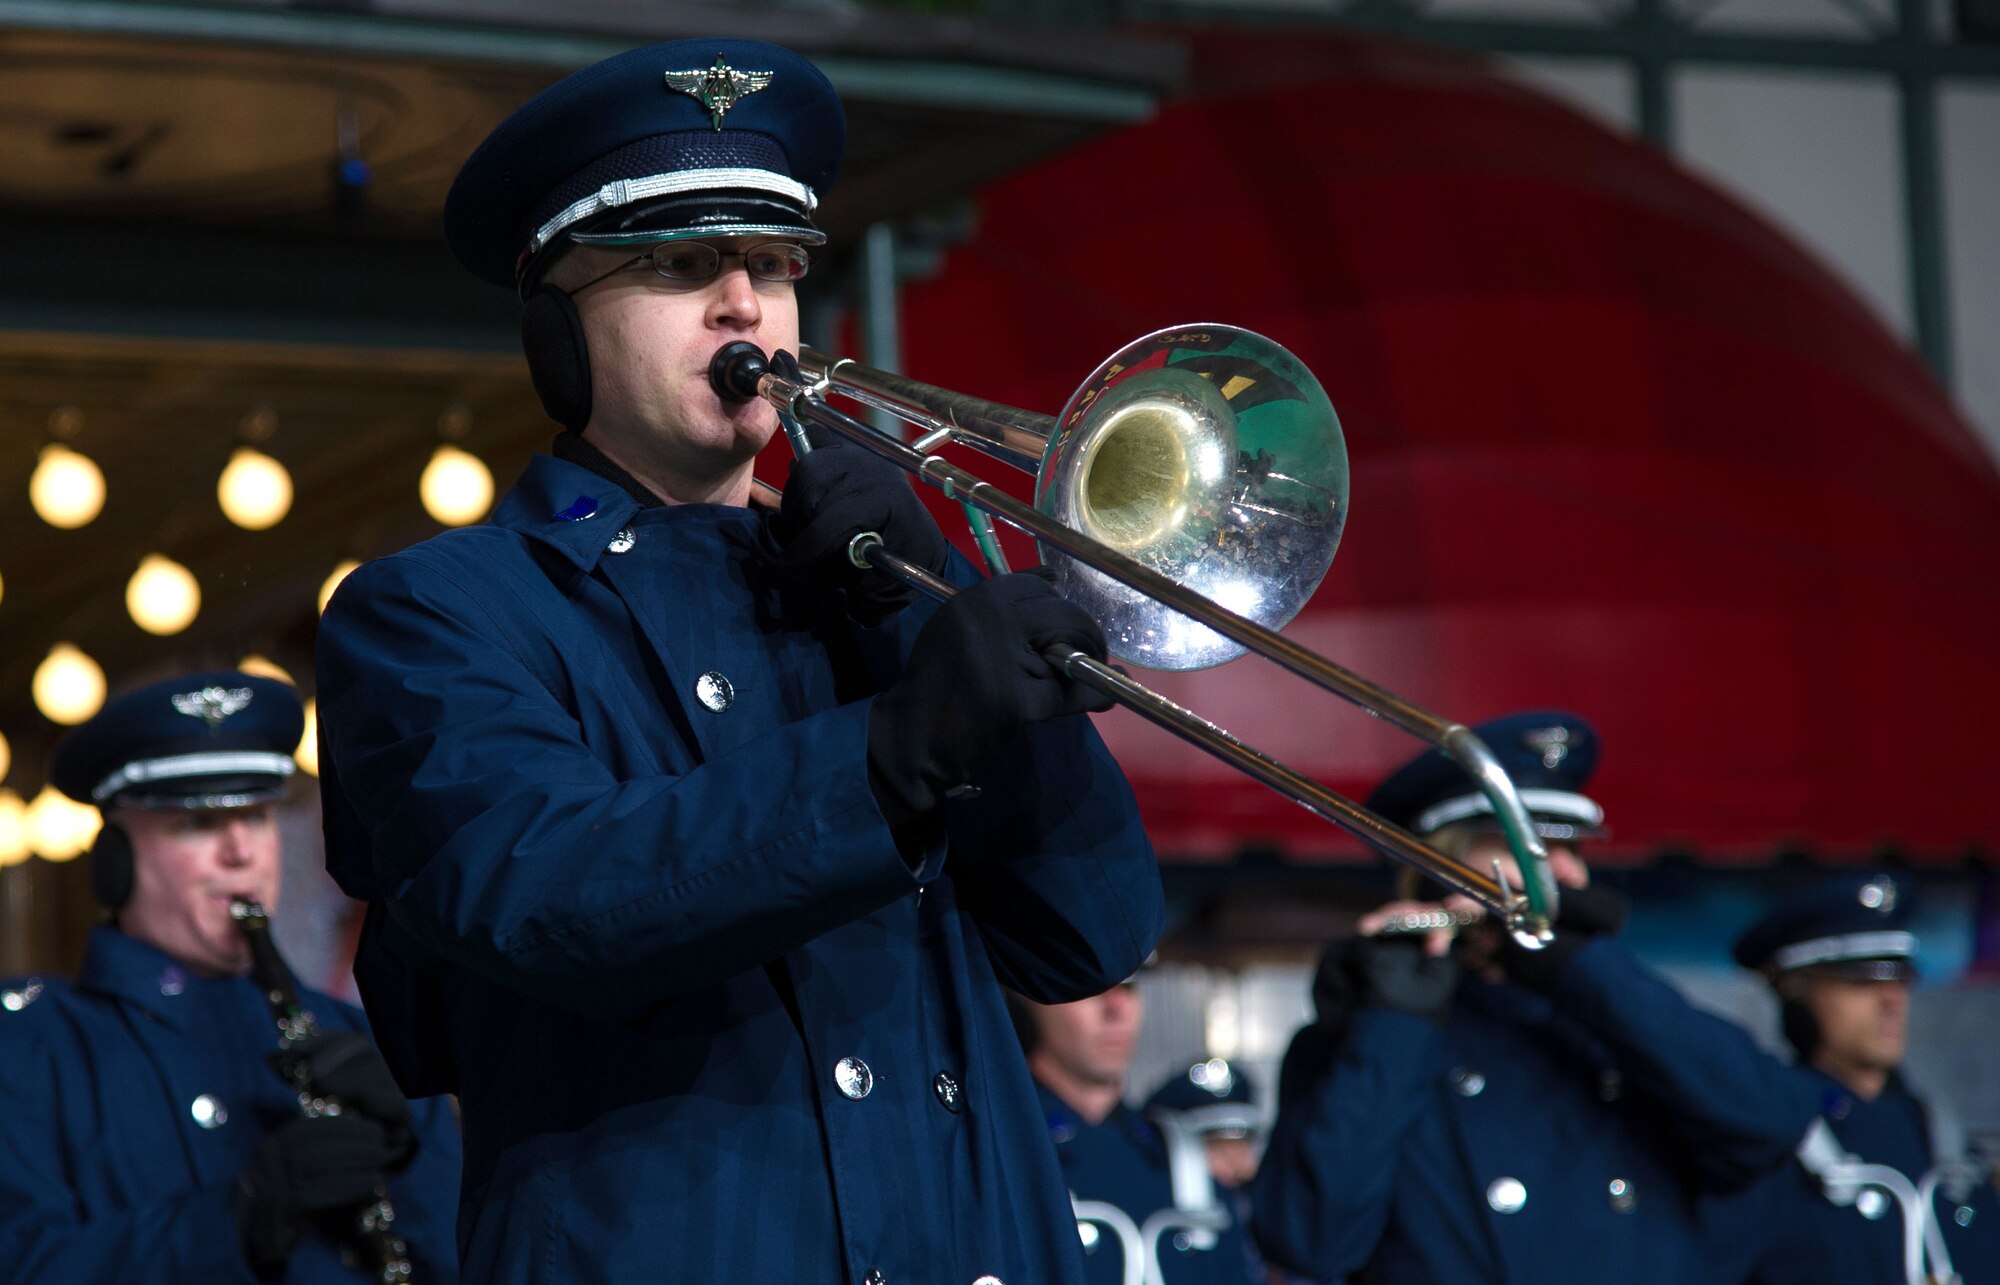 The U.S. Air Force Band rehearses prior to the 86th Annual Macy's Thanksgiving Day Parade at Herald Square, Nov. 22, 2012, in New York City. The 200 Airmen from the USAF Band and Honor Guard showcased Air Force power and precision to a televised audience of 55 million viewers during the parade. (U.S. Air Force photo by Senior Airman Perry Aston)